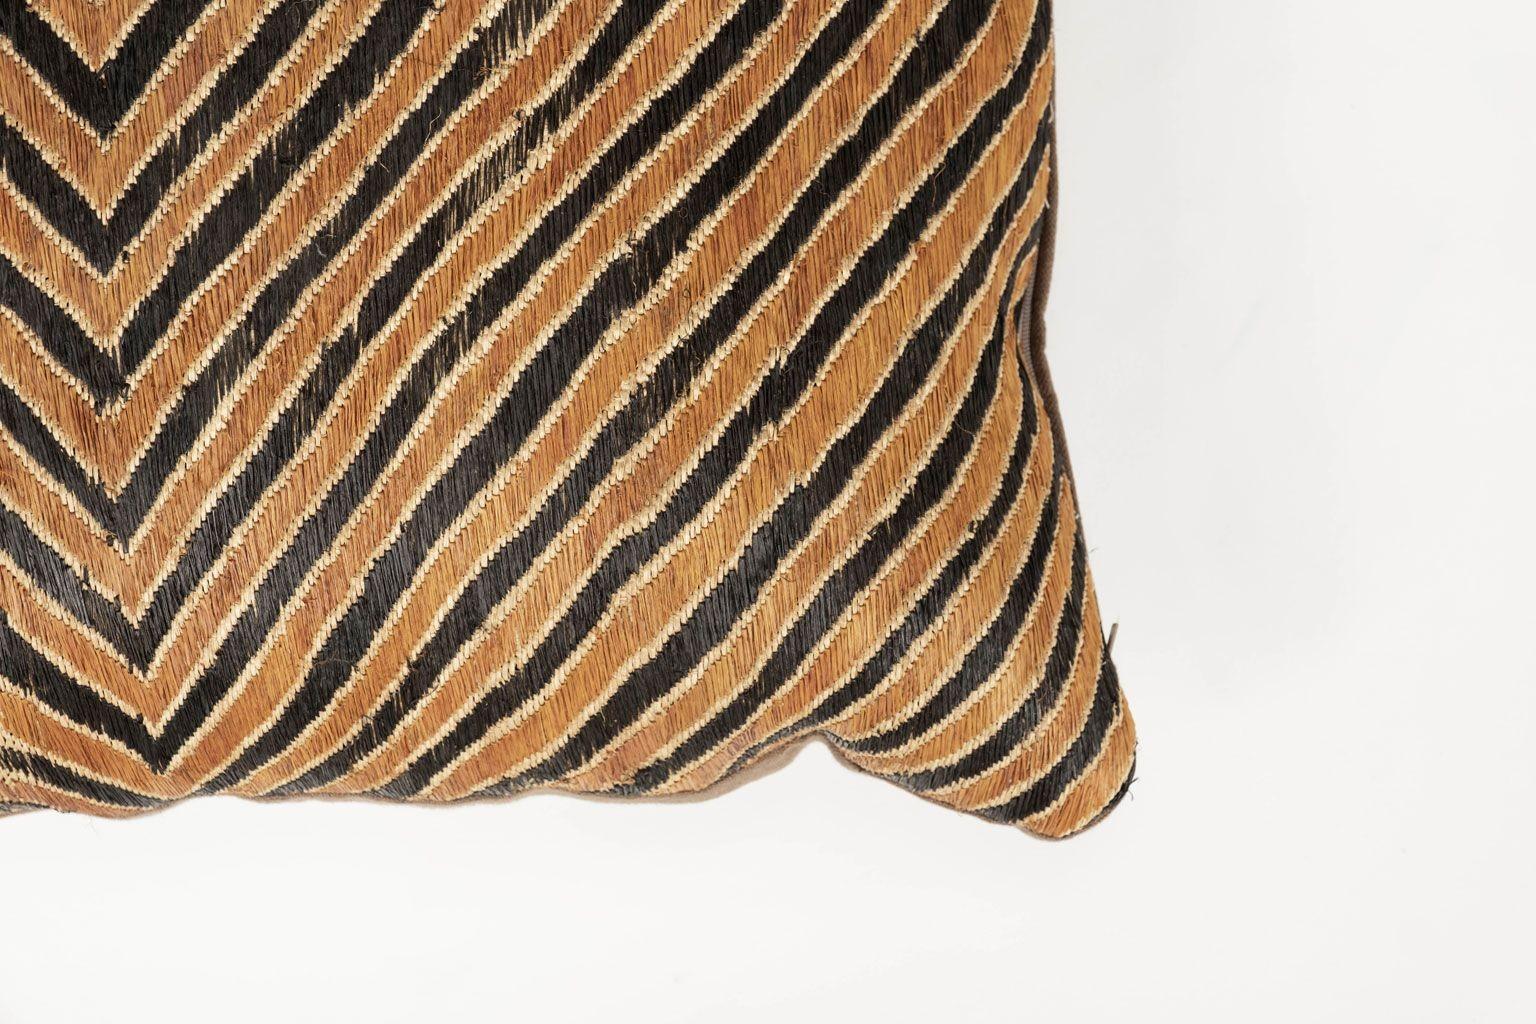 Large unusual custom cushion from vintage African Kuba cloth cushion. Hand-dyed ebony and orange color raphia palm woven in a bold pattern. Backed with brown linen. Includes zip fastener and feather insert.